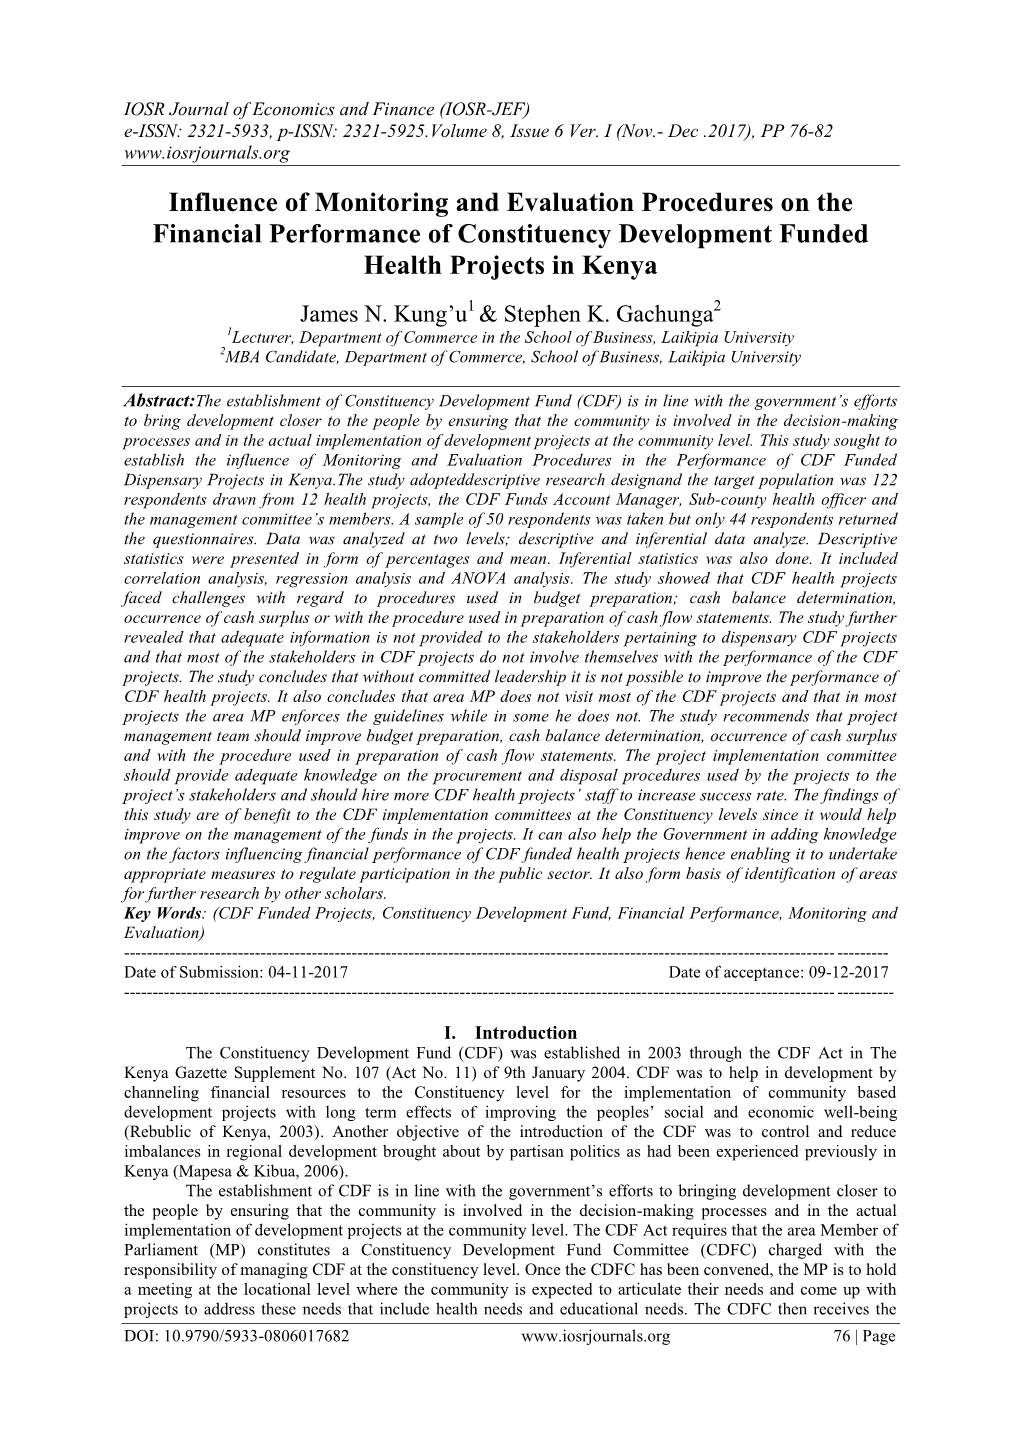 Influence of Monitoring and Evaluation Procedures on the Financial Performance of Constituency Development Funded Health Projects in Kenya